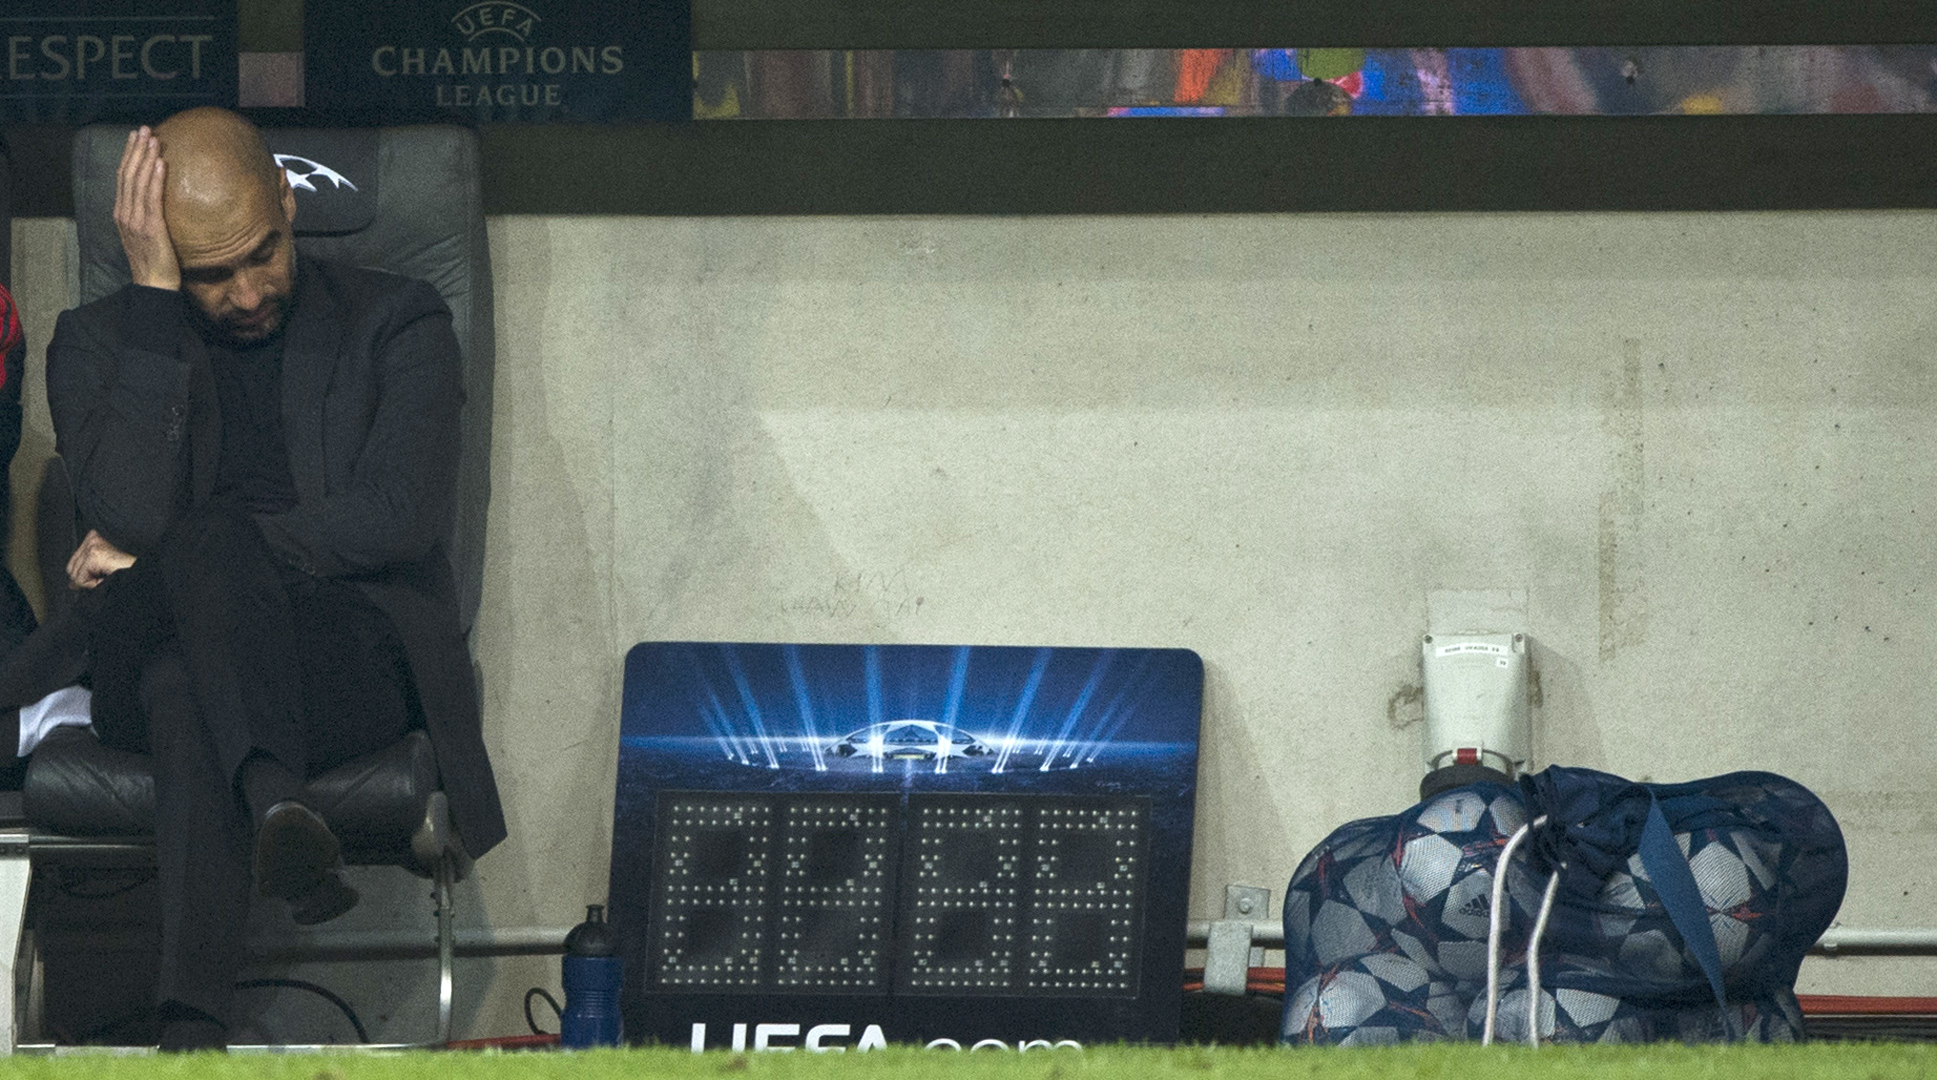 Pep Guardiola can hardly watch on the bench. Photo: AFP